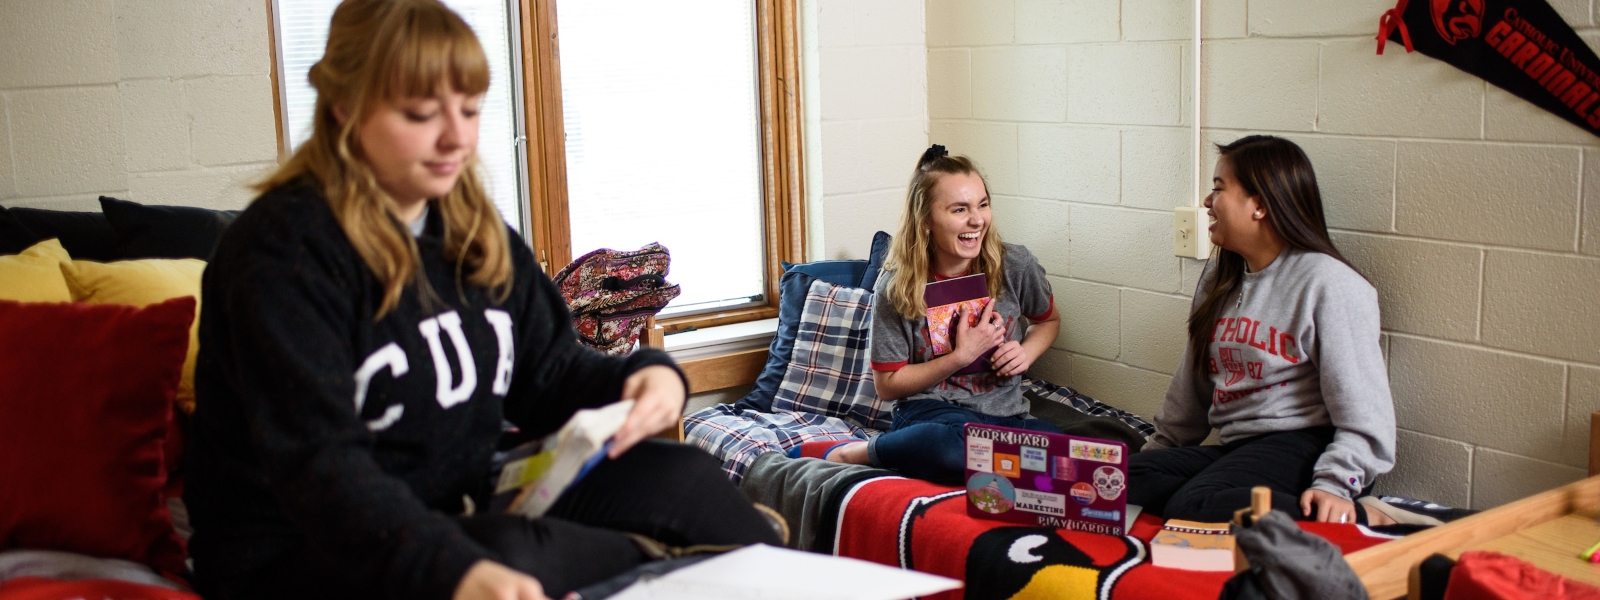 Female students in residence hall room